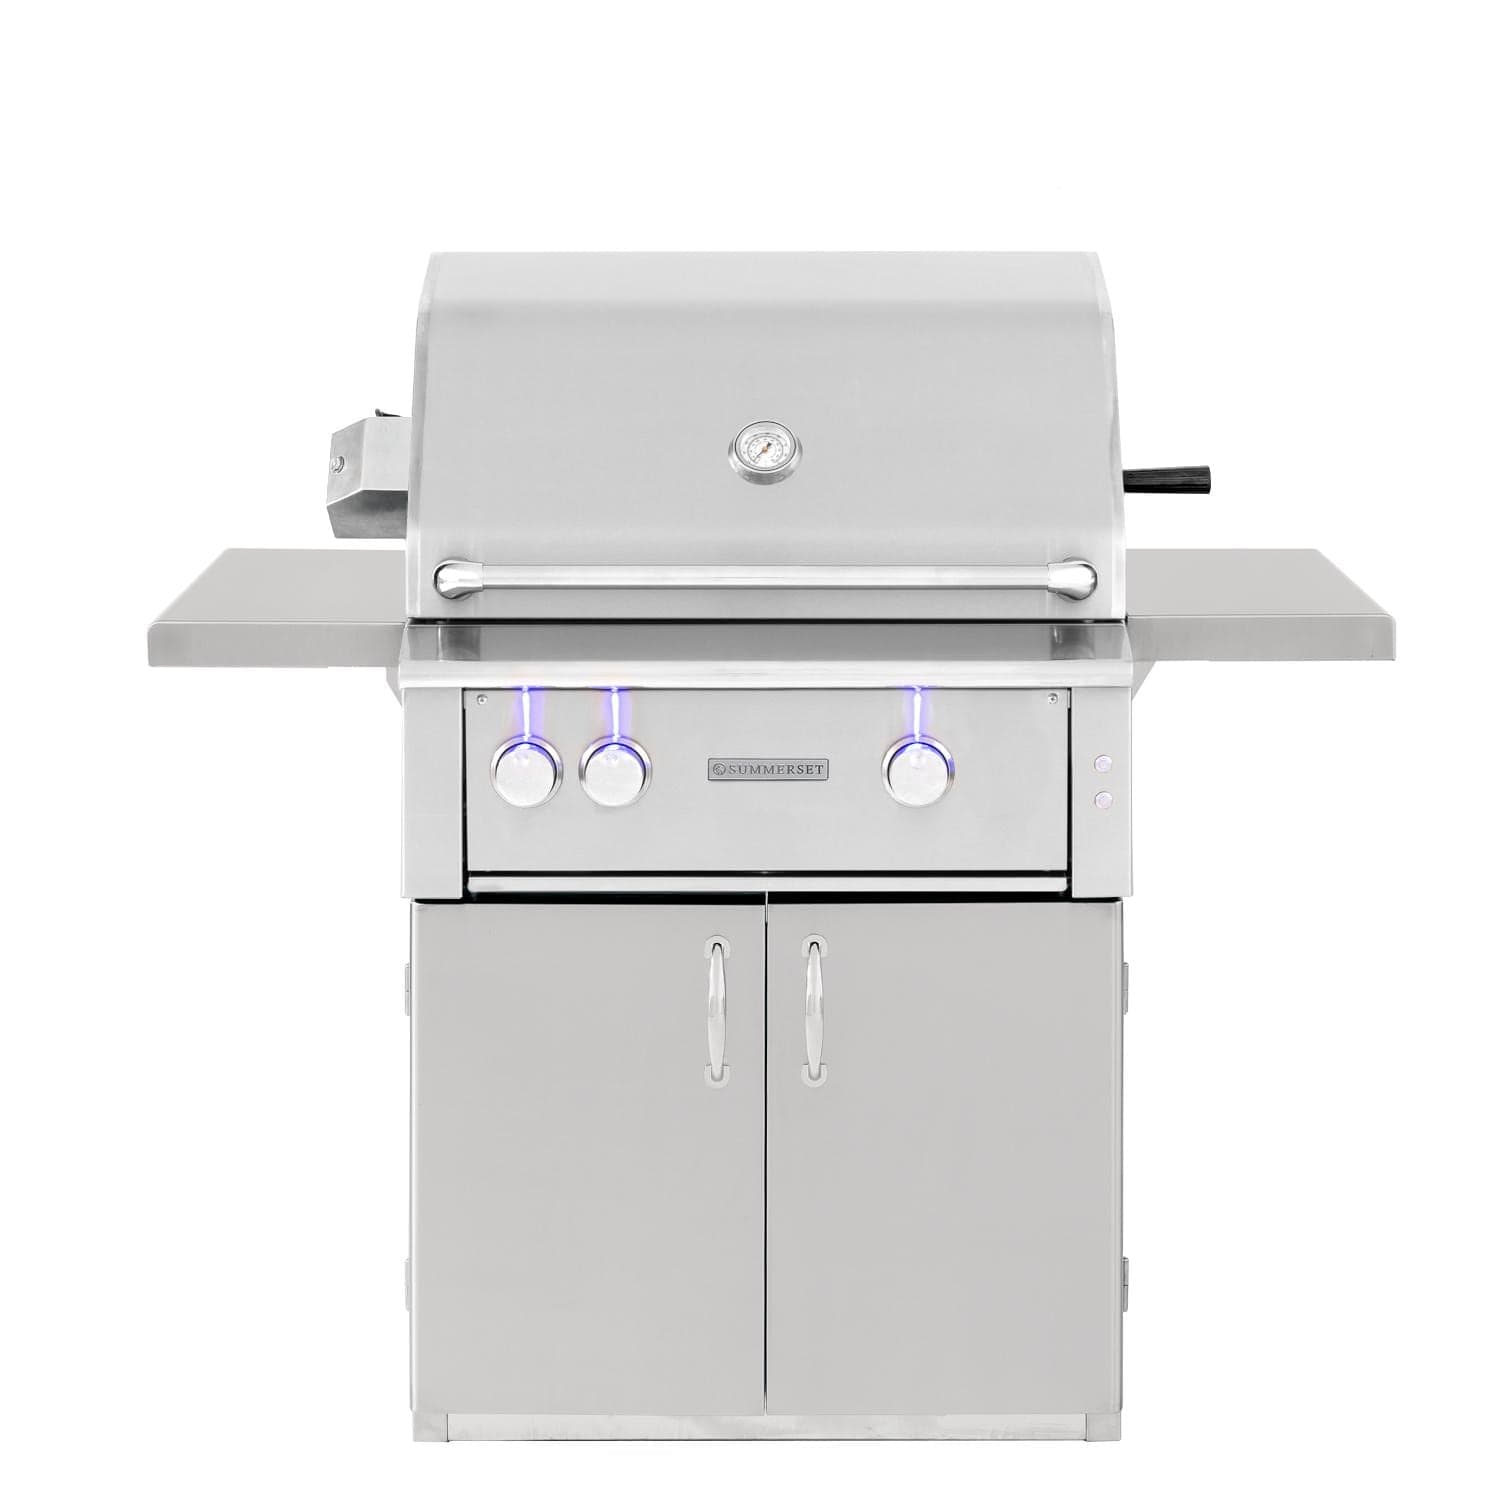 Summerset Grills Luxury Gas Grill Propane Summerset Alturi 30-Inch 2-Burner Free Standing | Natural Gas OR Propane | Gas Grill With Stainless Steel Burners & Rotisserie - ALT30T